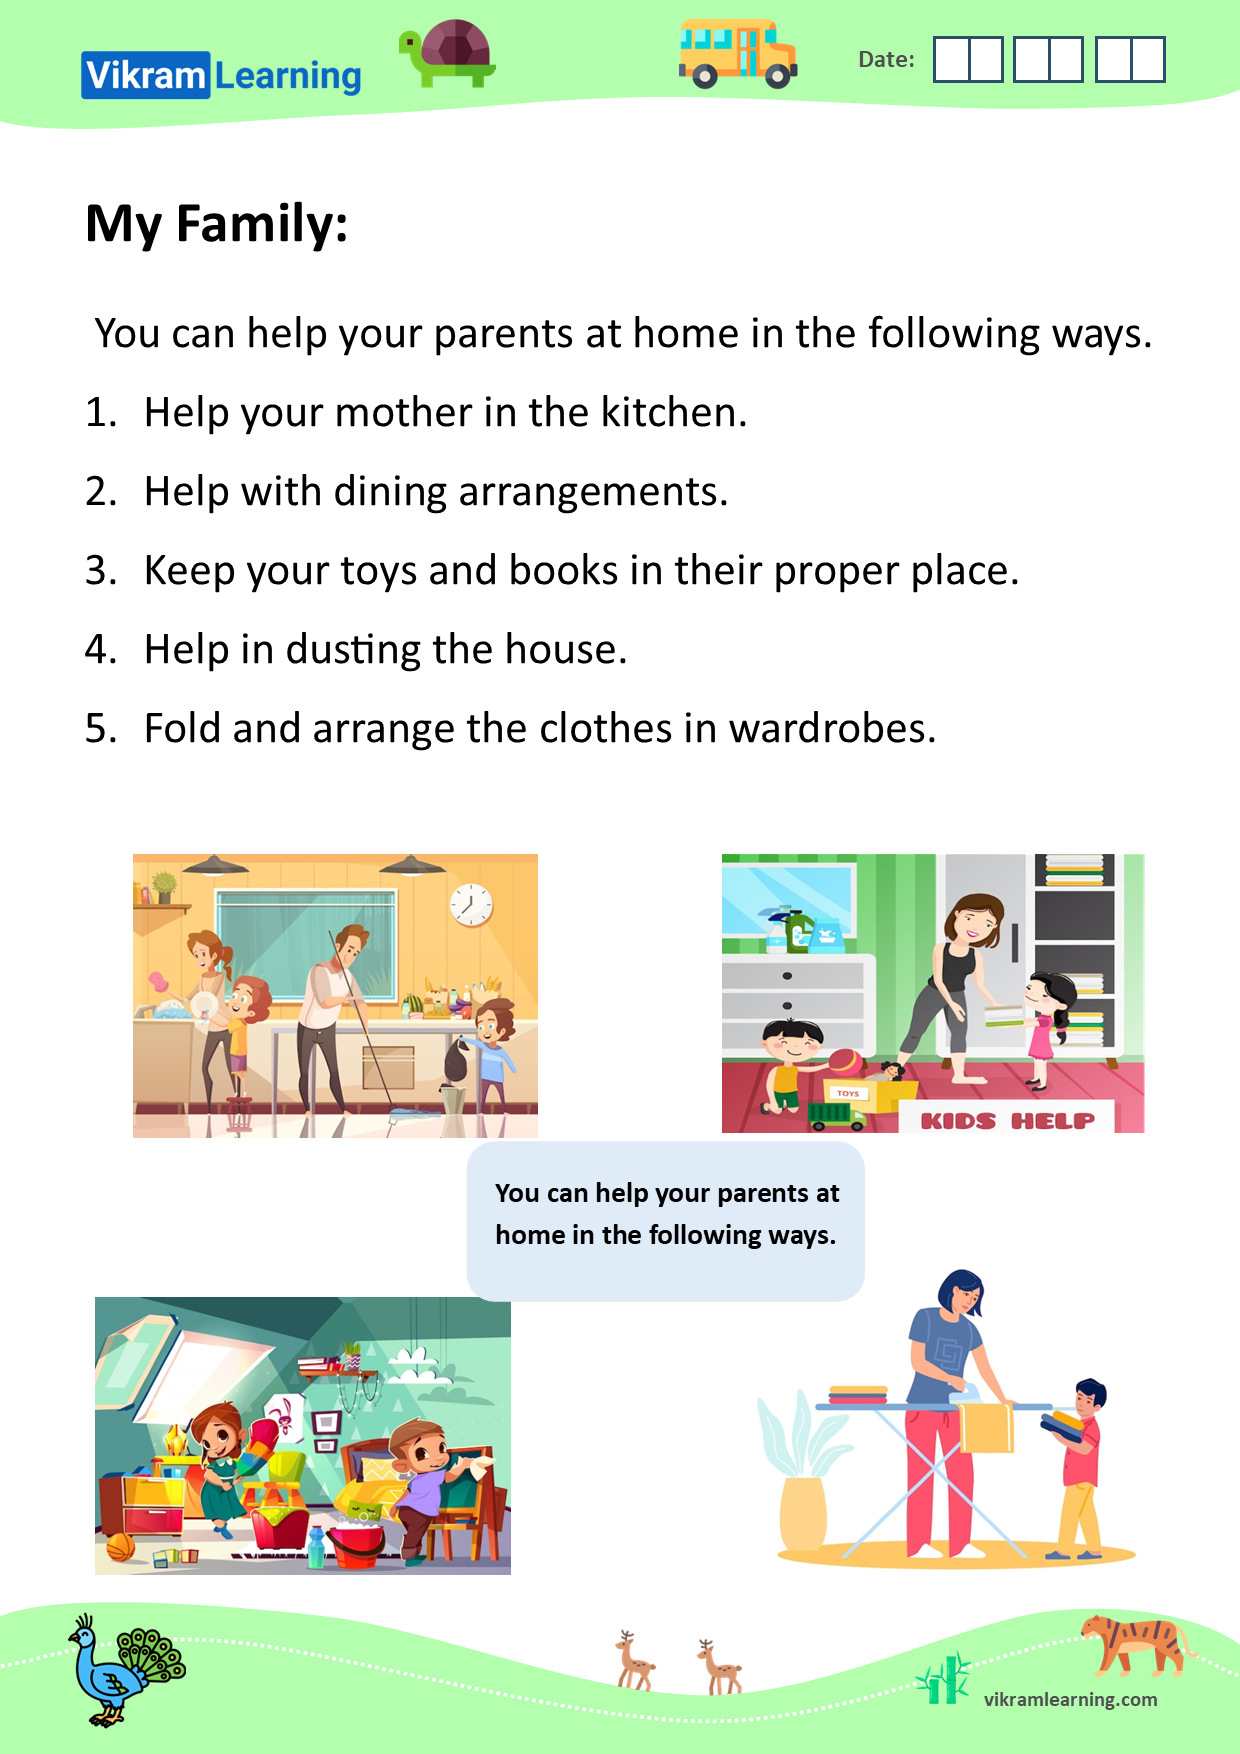 Download my family worksheets for free | vikramlearning.com